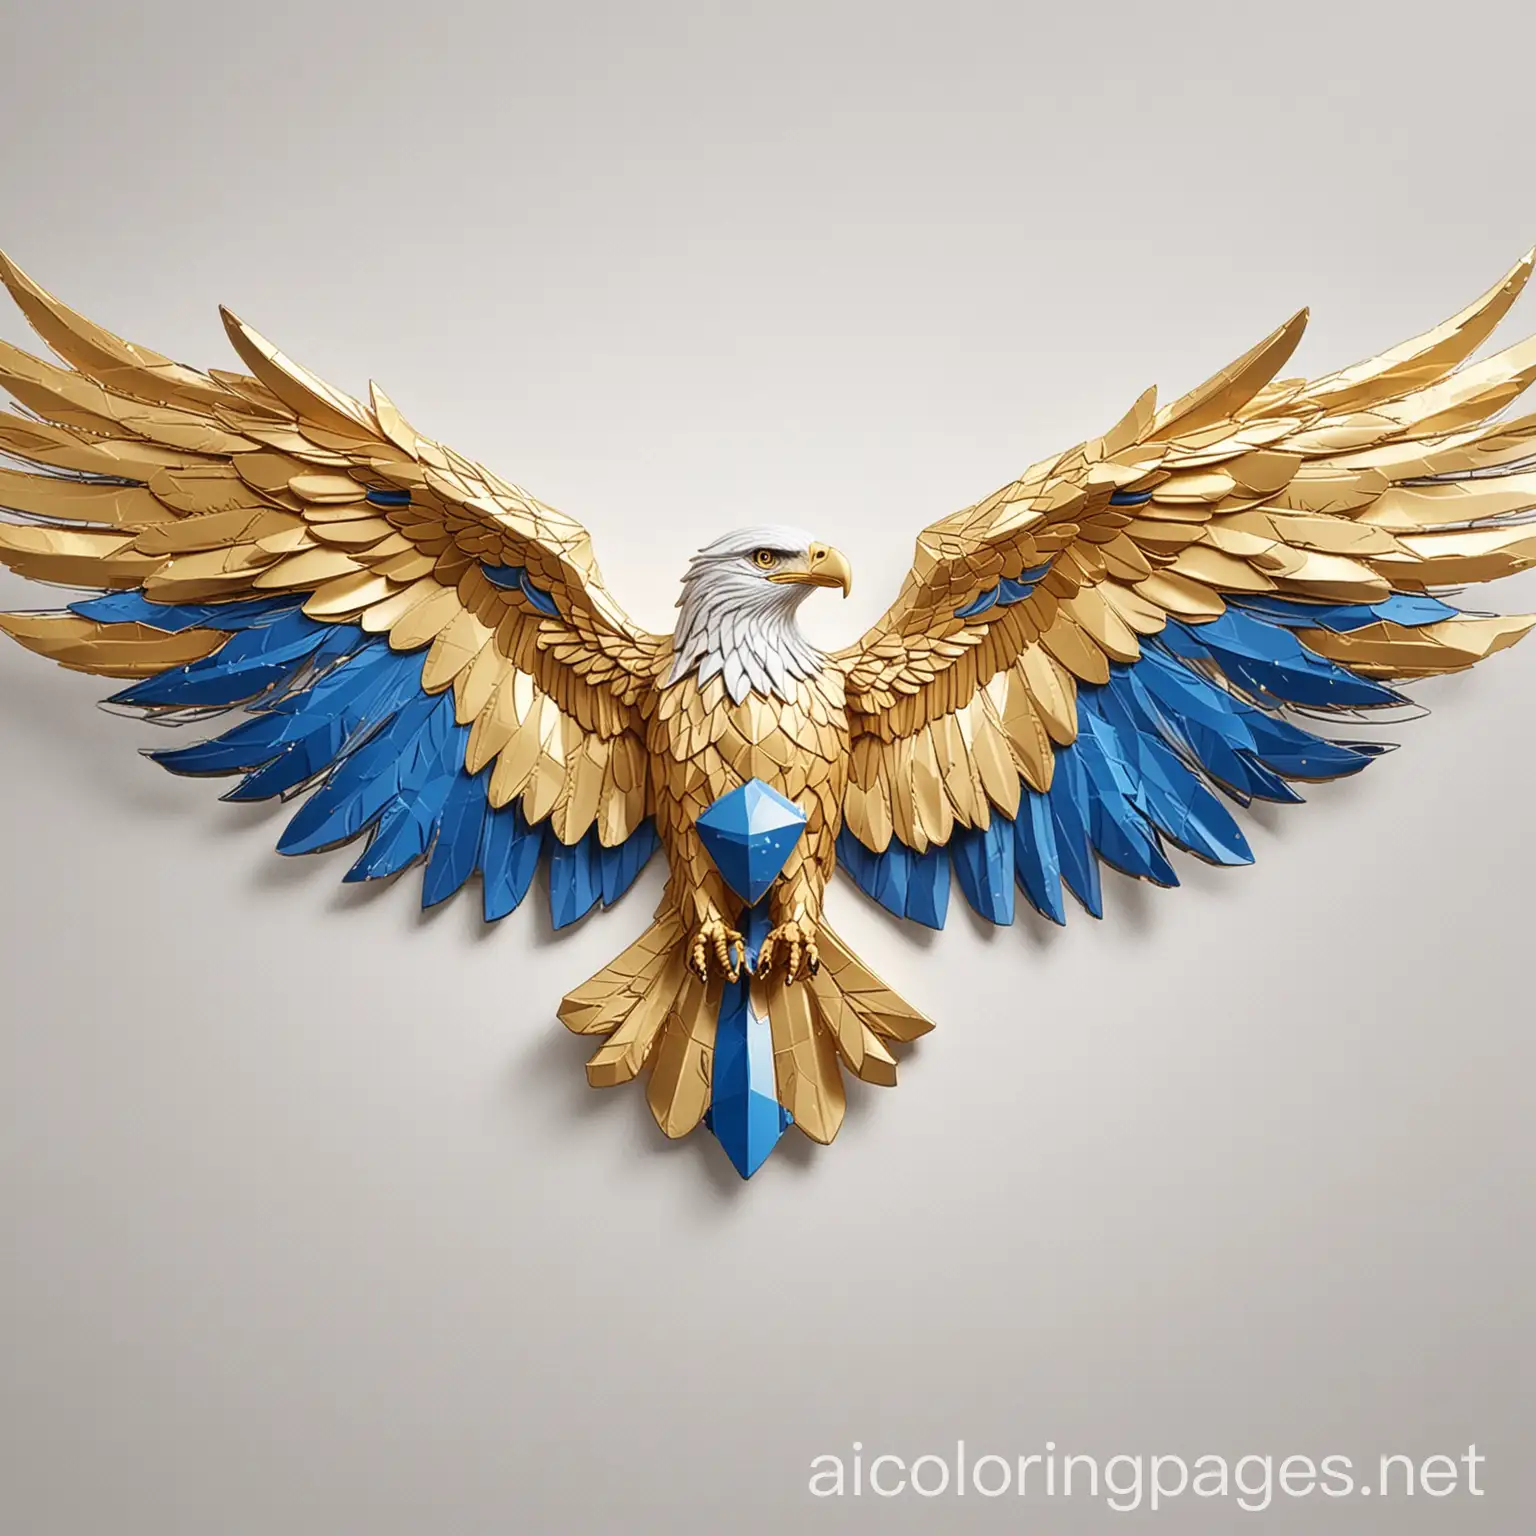 Geometric-Eagle-Logo-Design-in-Gold-and-Blue-SPARKSWAY-ADS